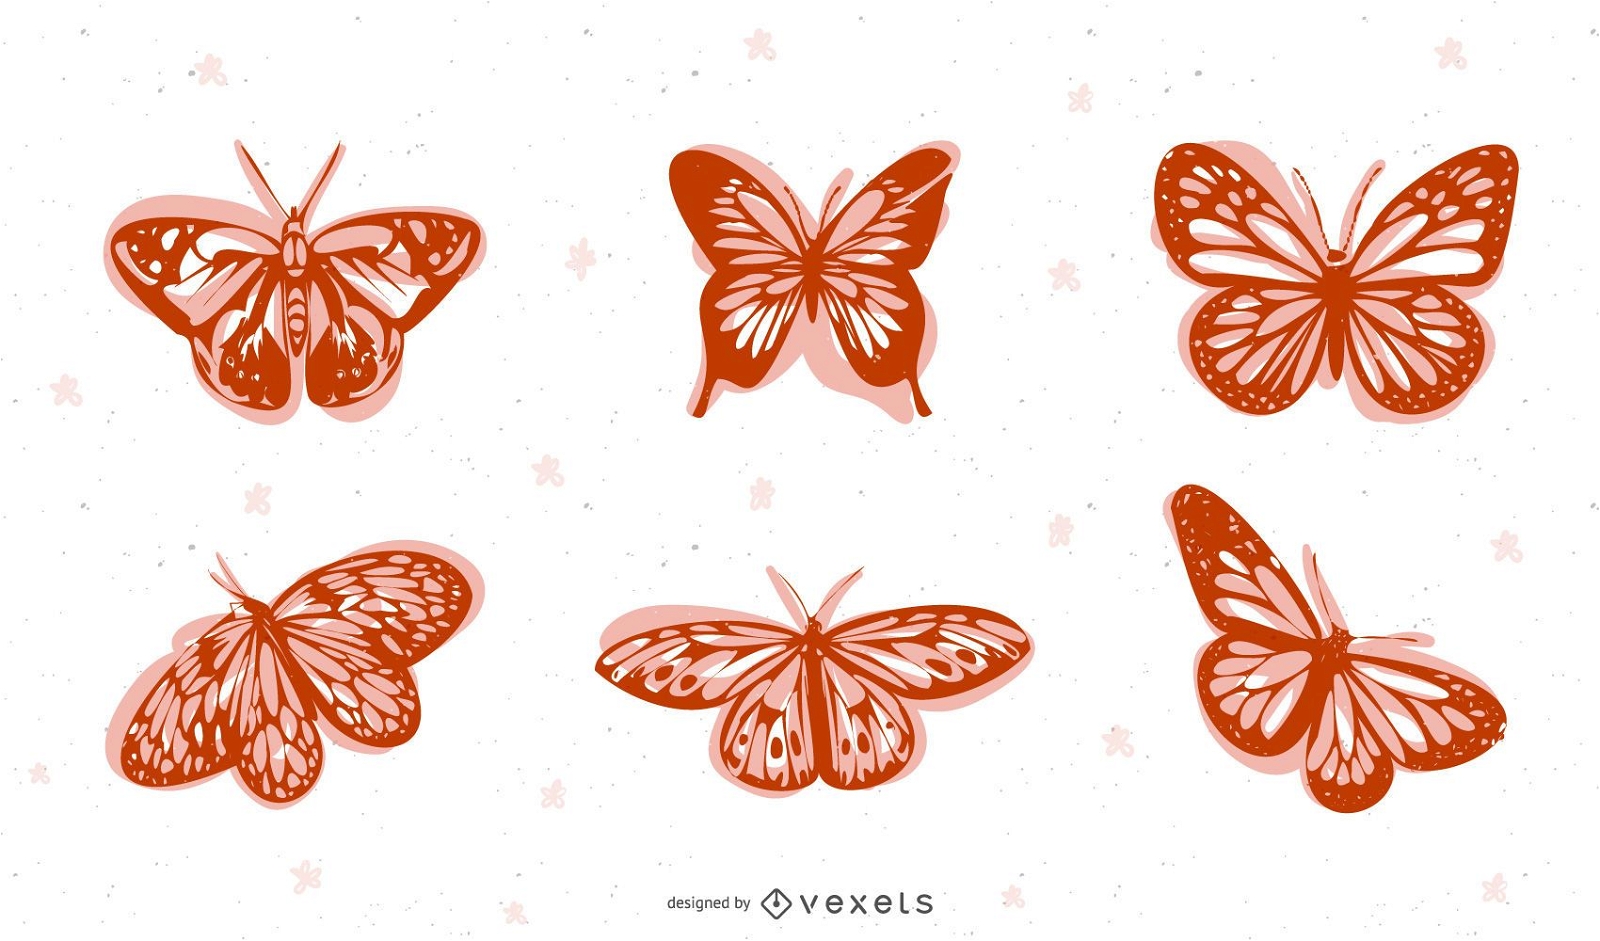 Decorative Silhouette Butterfly Pack